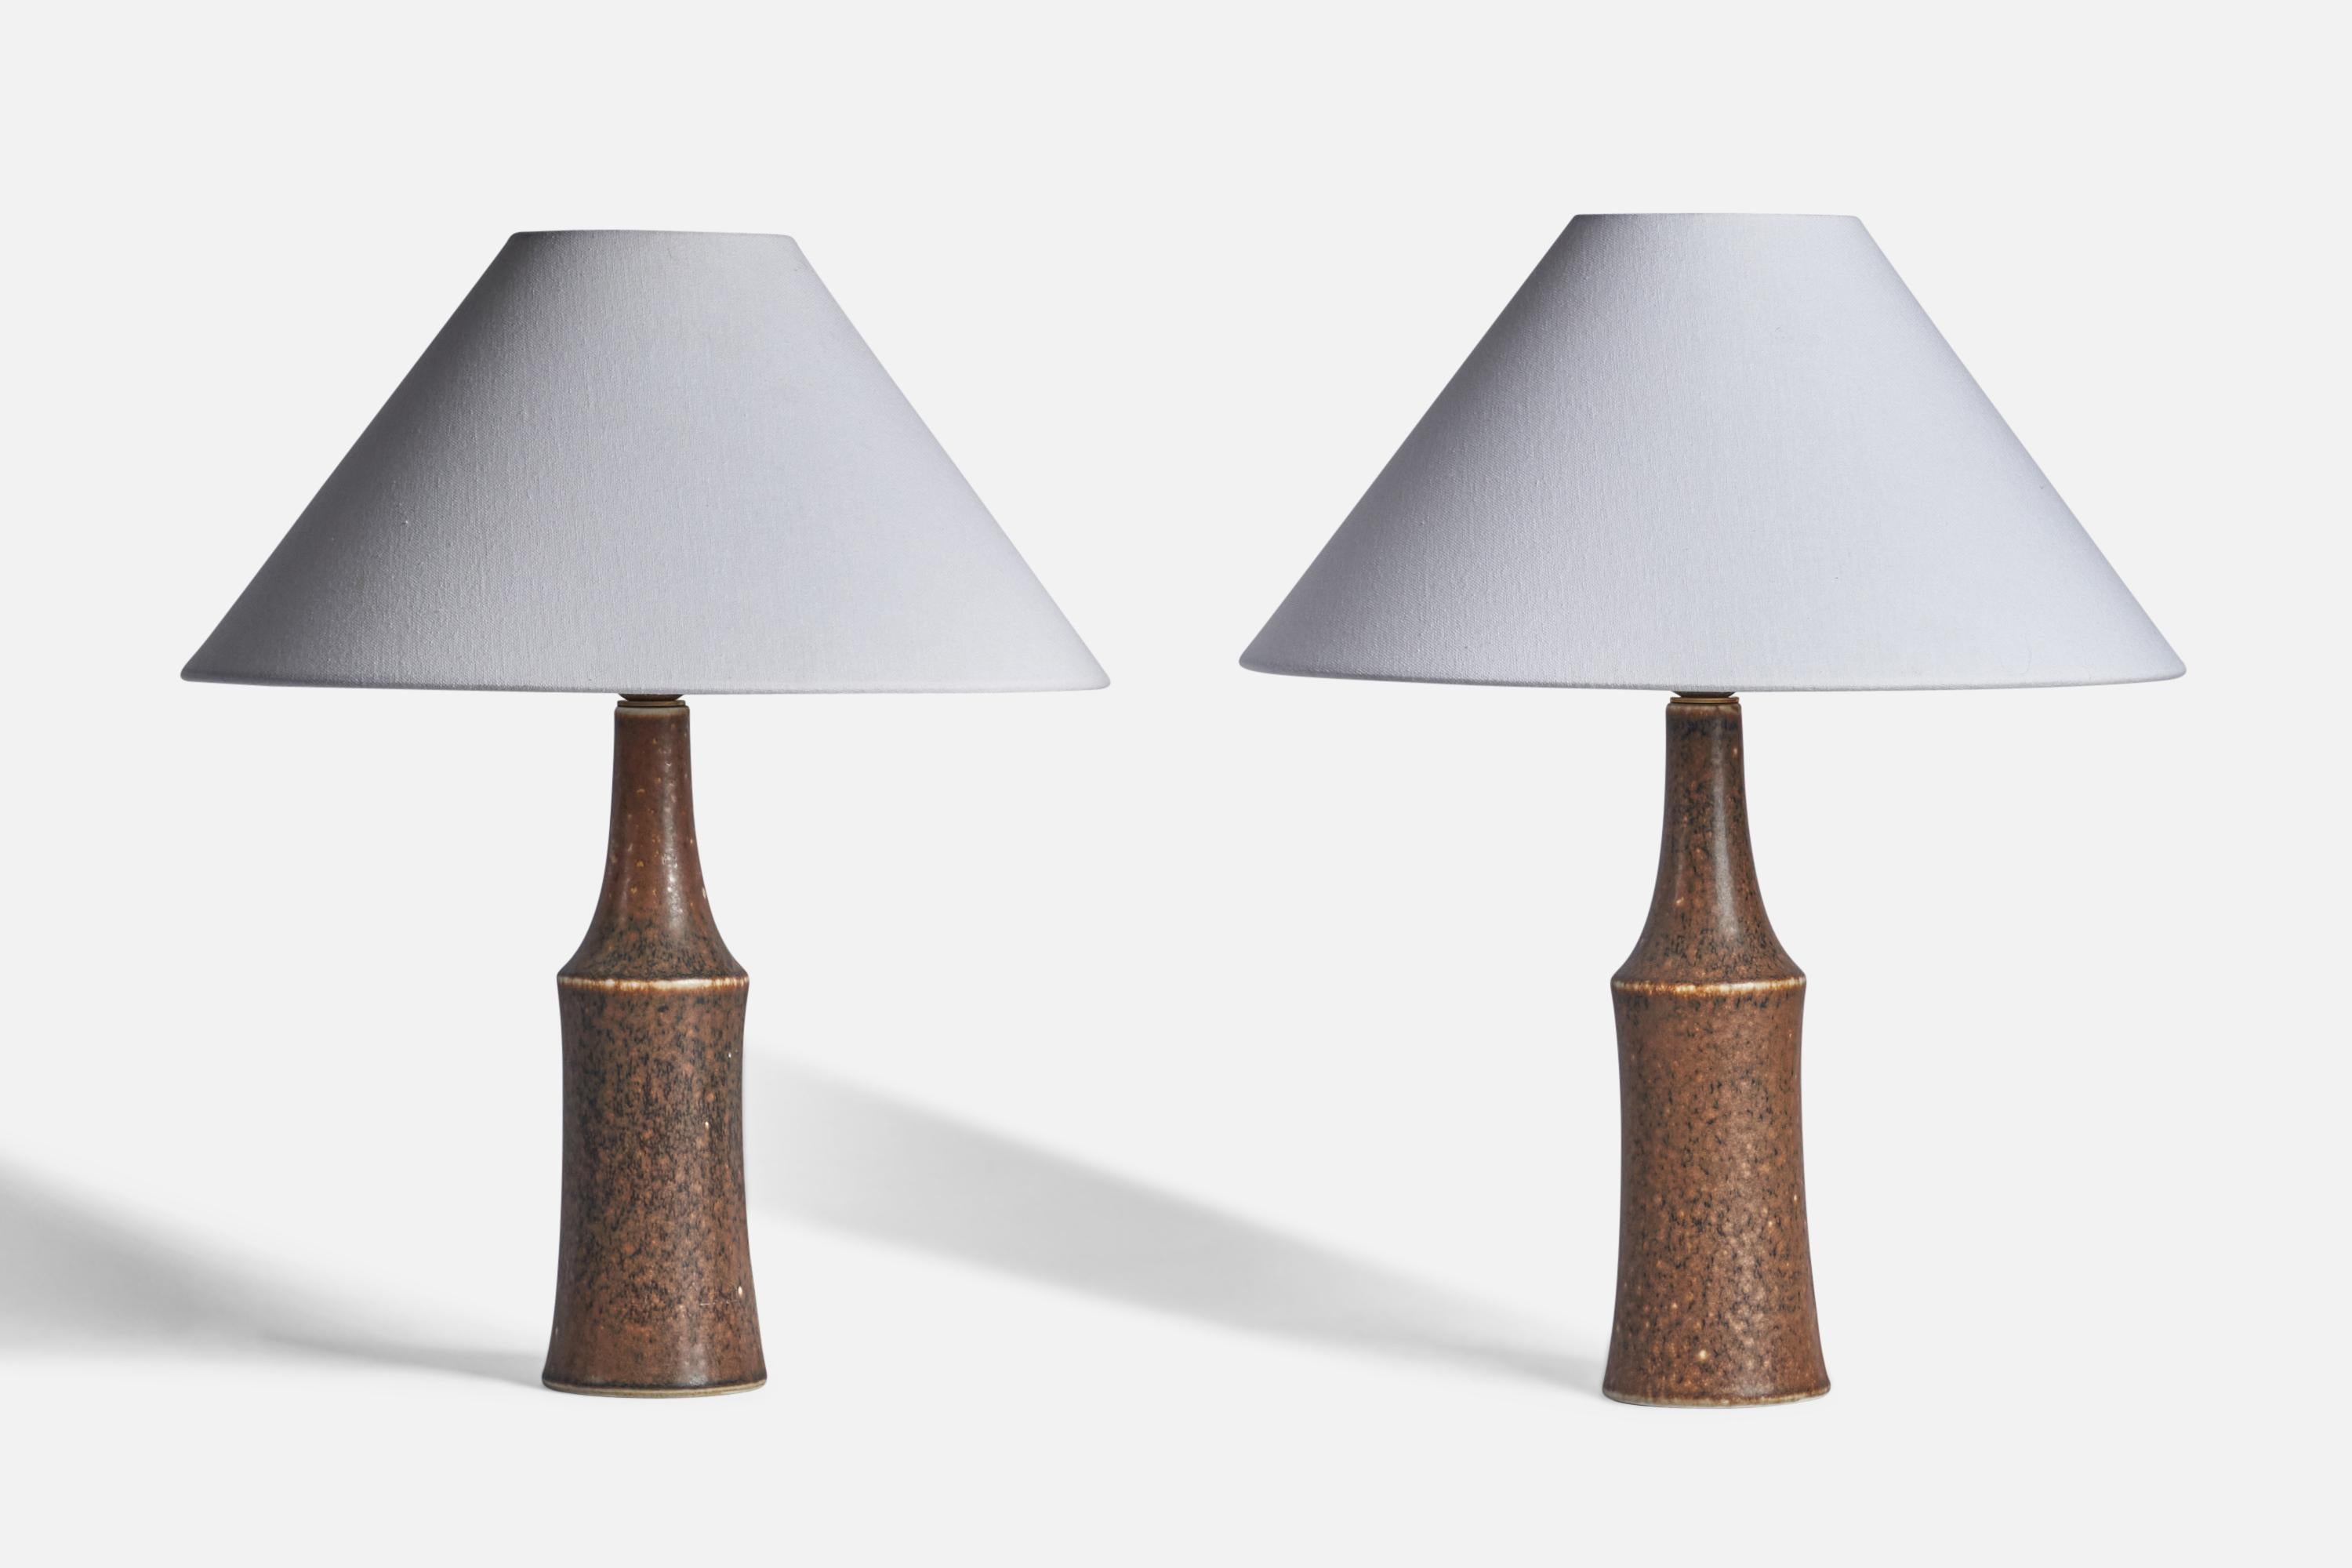 A pair of brown-glazed stoneware table lamps designed by Carl-Harry Stålhane and produced by Rörstrand, Sweden, 1950s.

Dimensions of Lamp (inches): 13.85 H x 3.80” Diameter
Dimensions of Shade (inches): 4.5” Top Diameter x 16” Bottom Diameter x